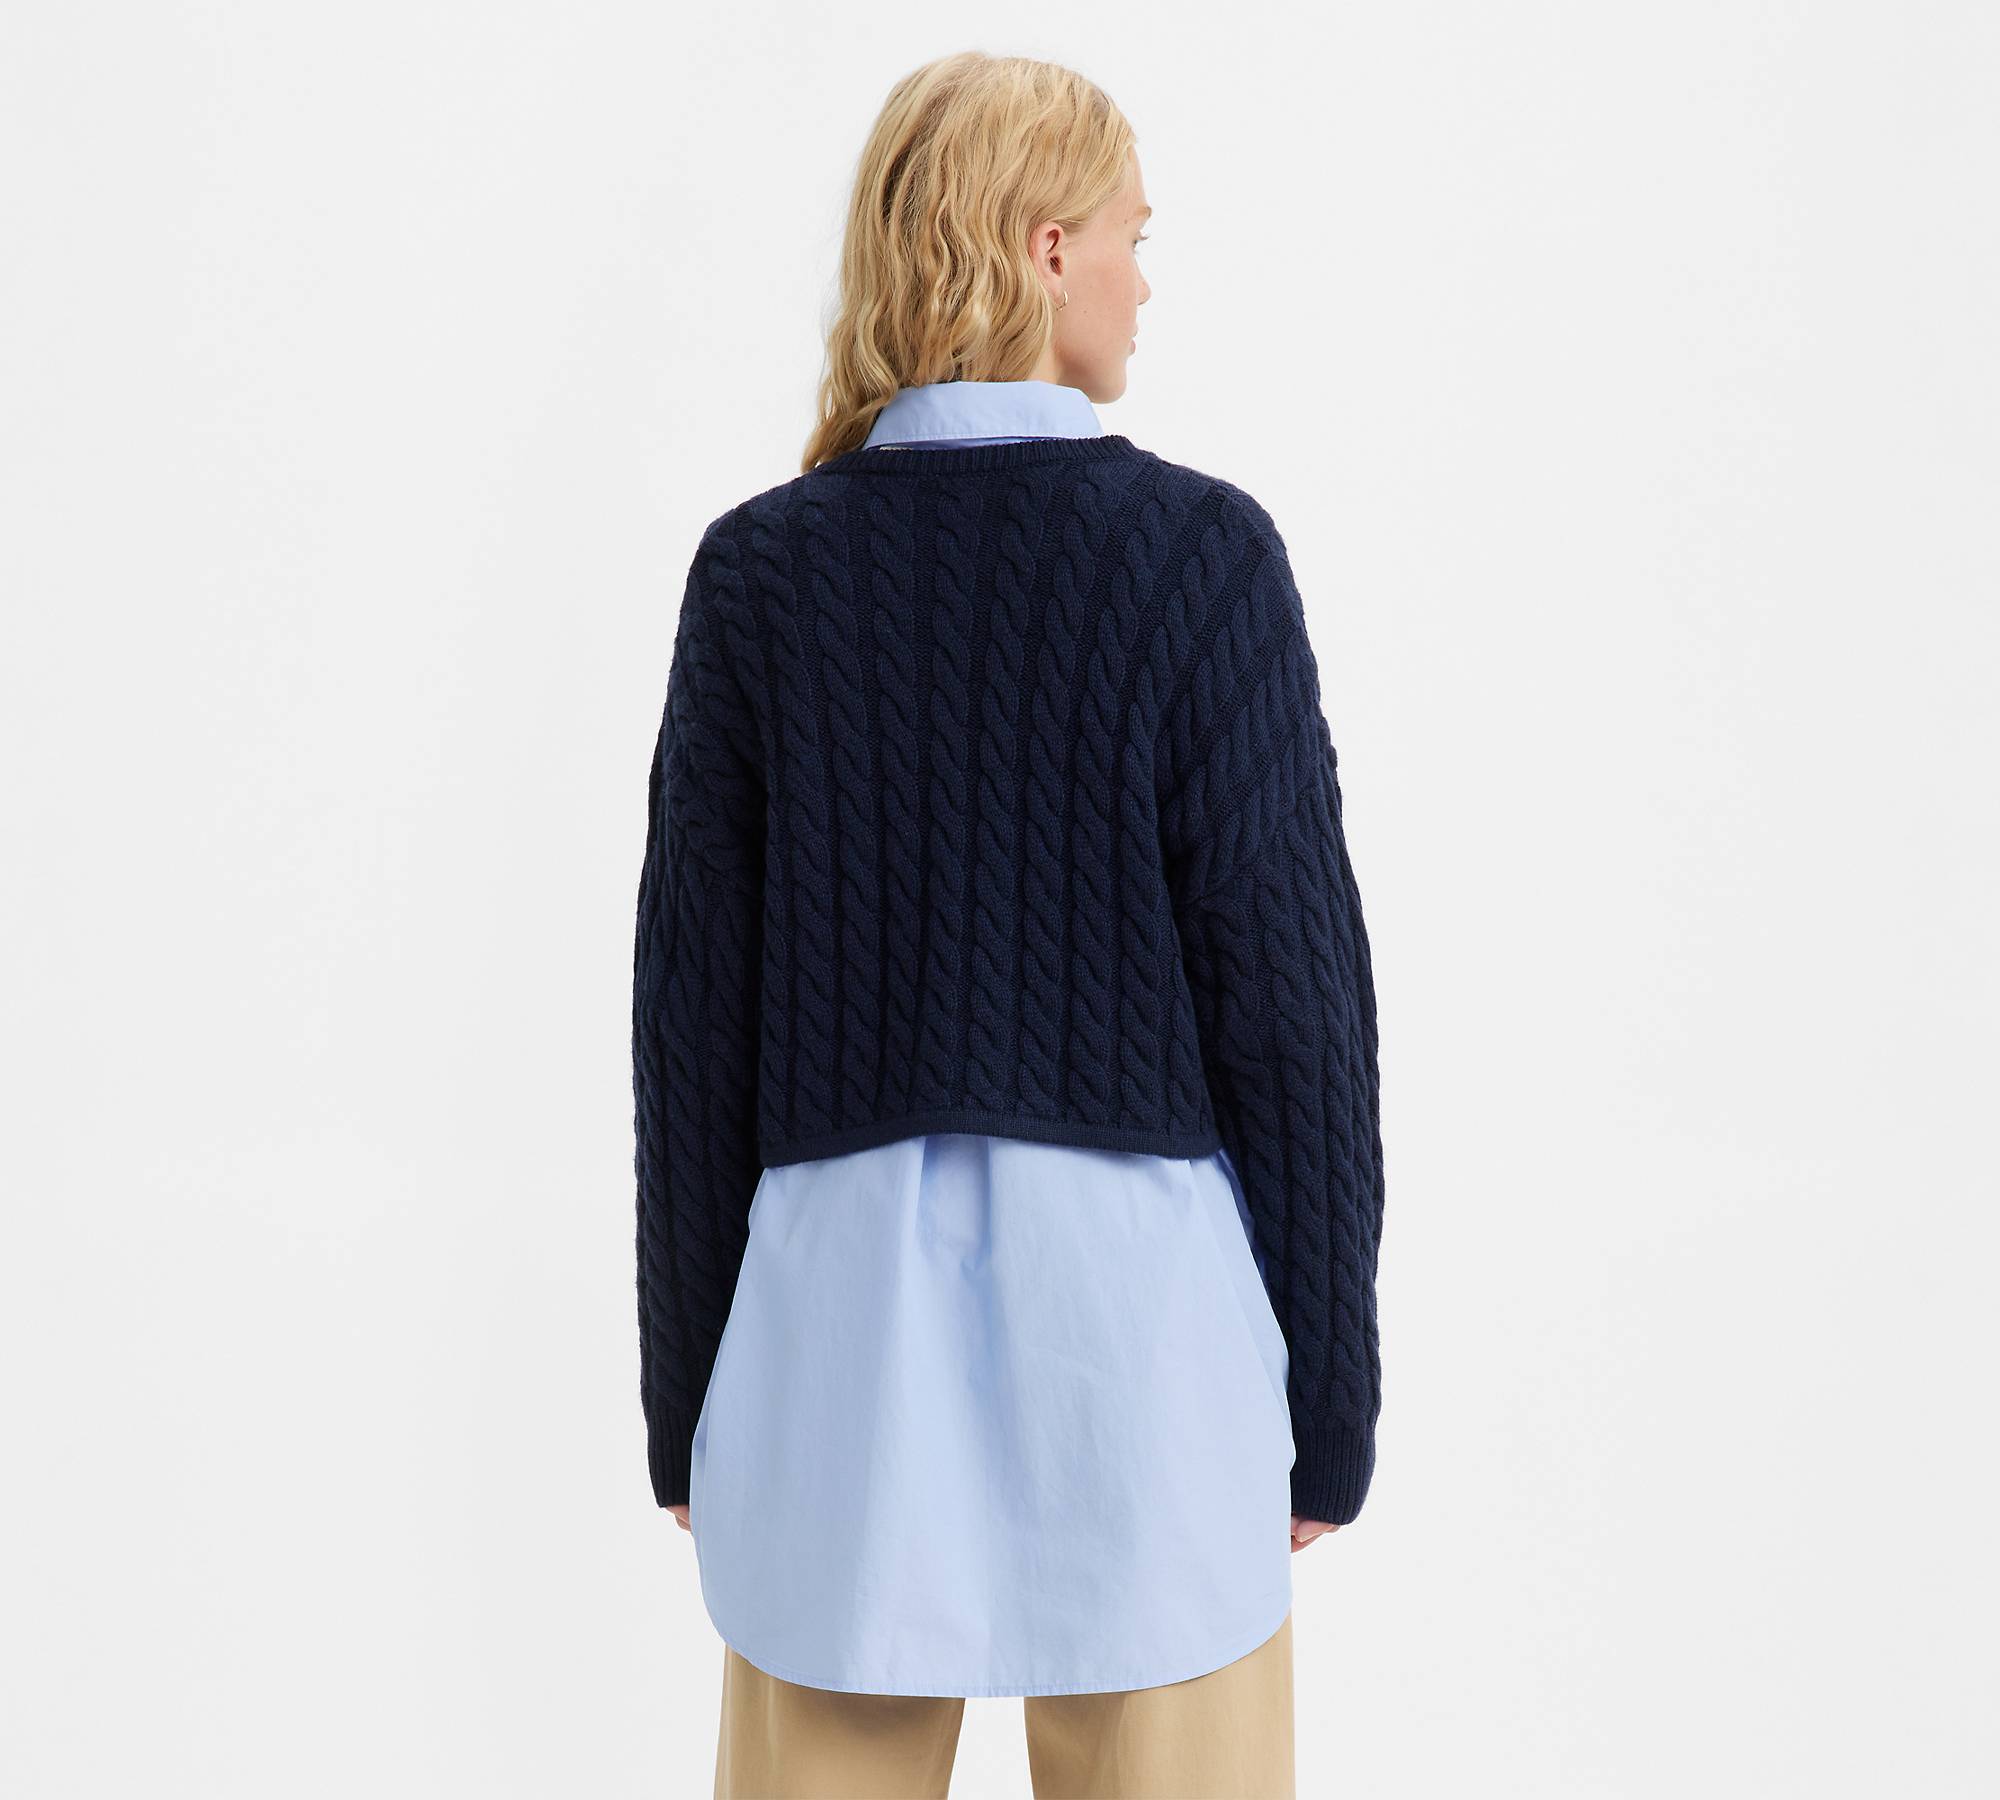 Reproduceren tuin Nadeel Rae Cropped Sweater - Blue | Levi's® US